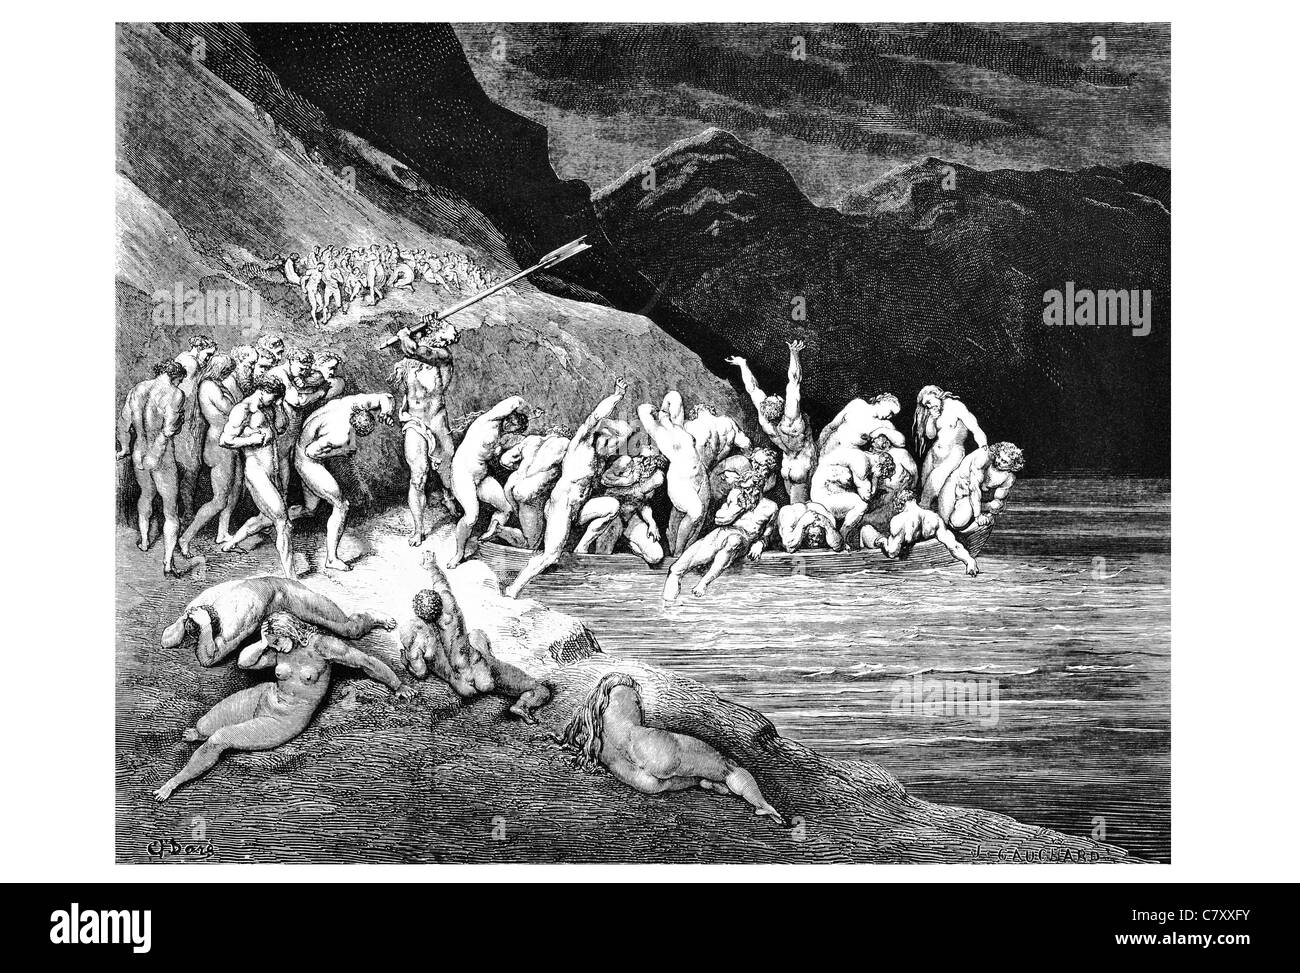 Adam's evil brood shore The Vision of Hell Dante Alighieri Gustave Doré divine comedy suffering punishment afterlife Religion in Stock Photo